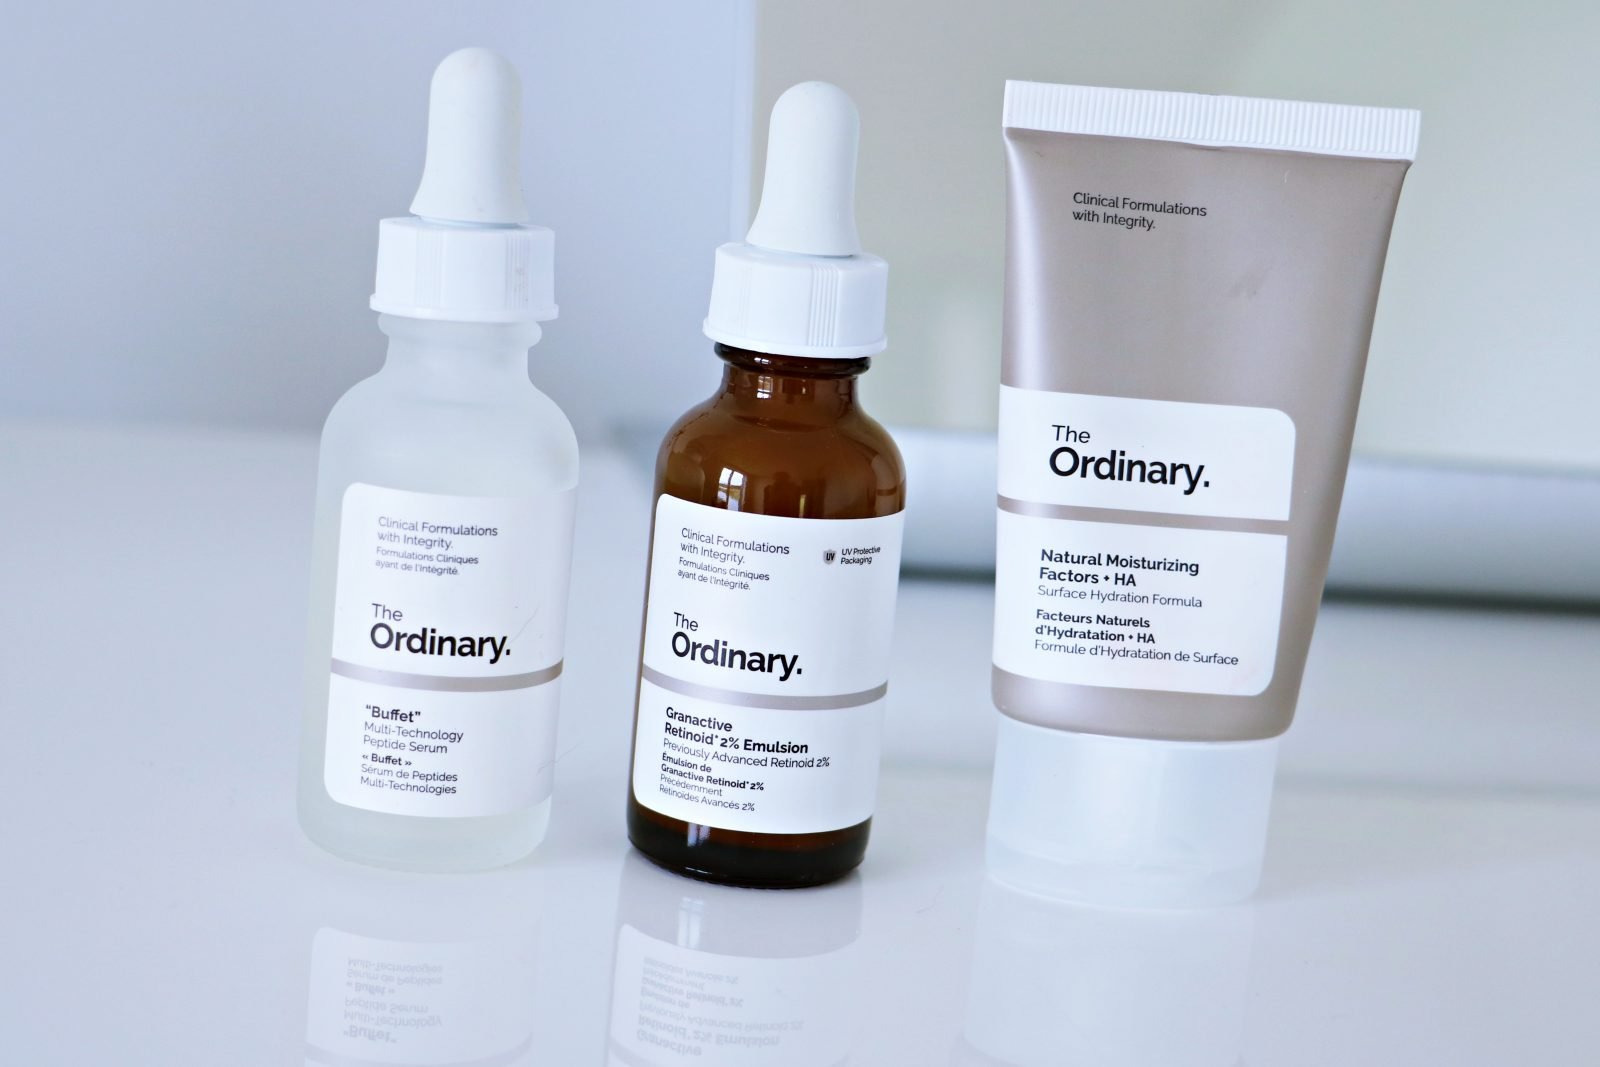 THE ORDINARY NO-BRAINER SET REVIEW